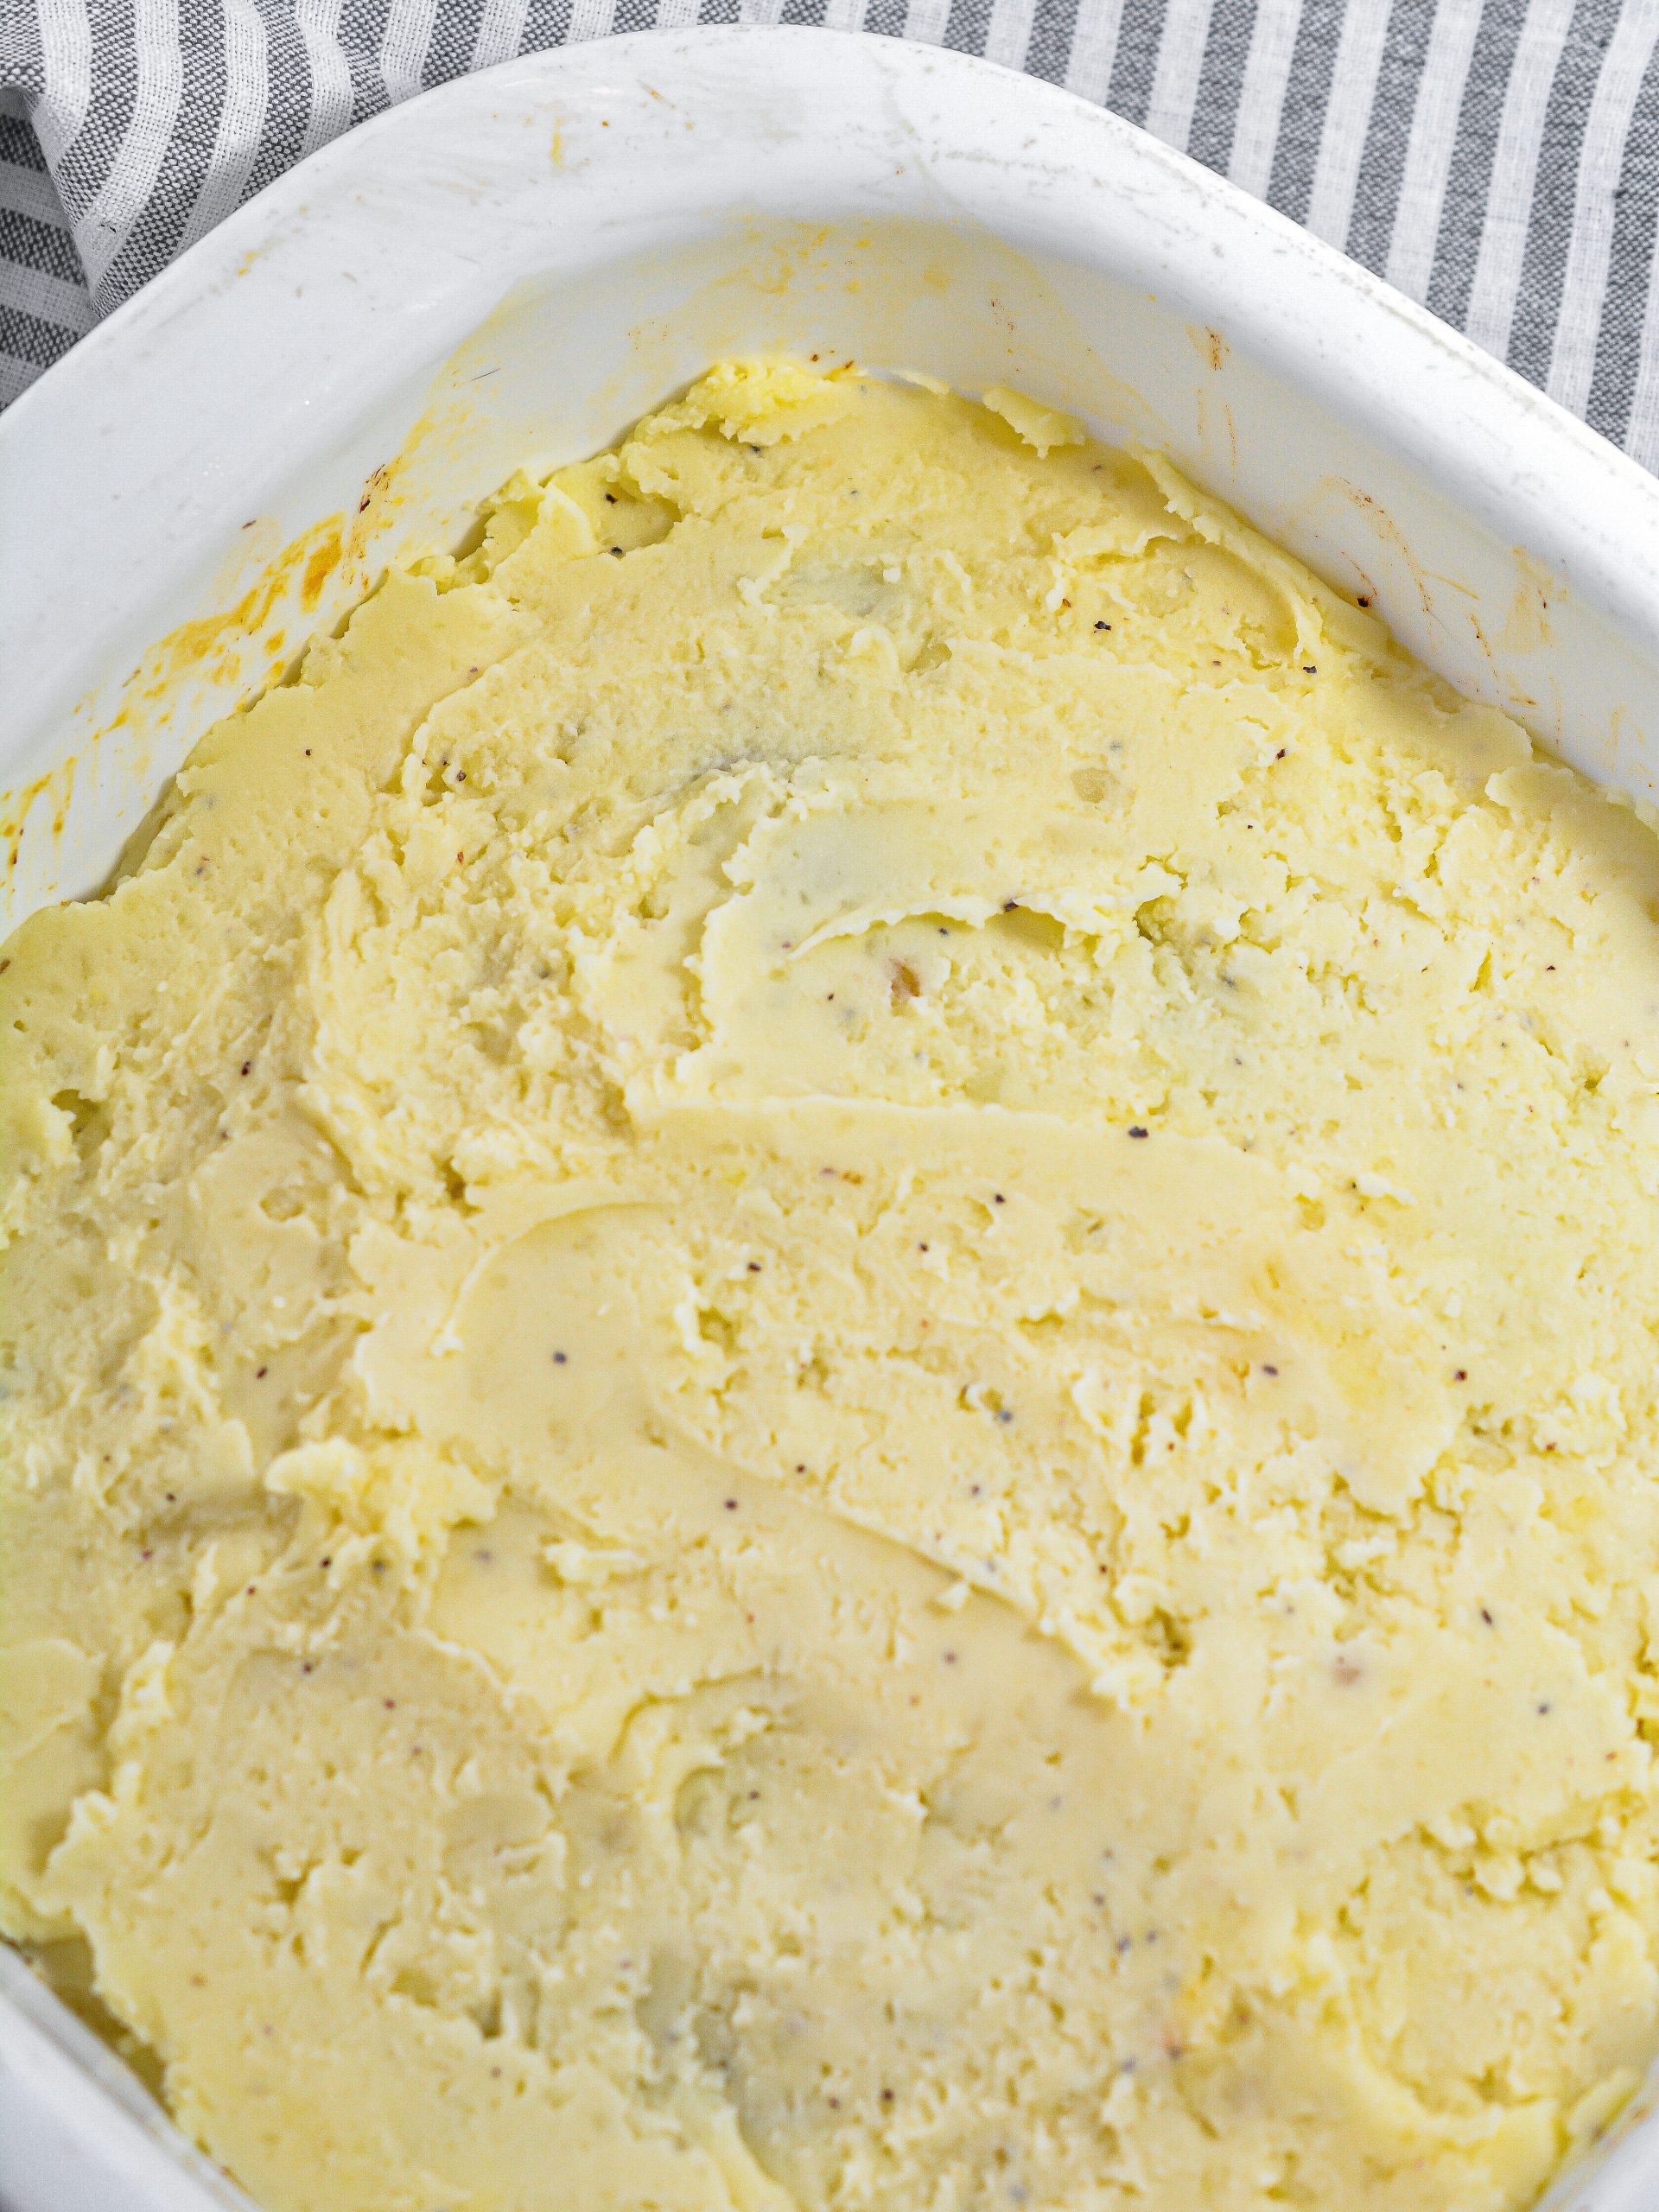 Spread the cooked potatoes over the meatloaf mixture in the baking dish.